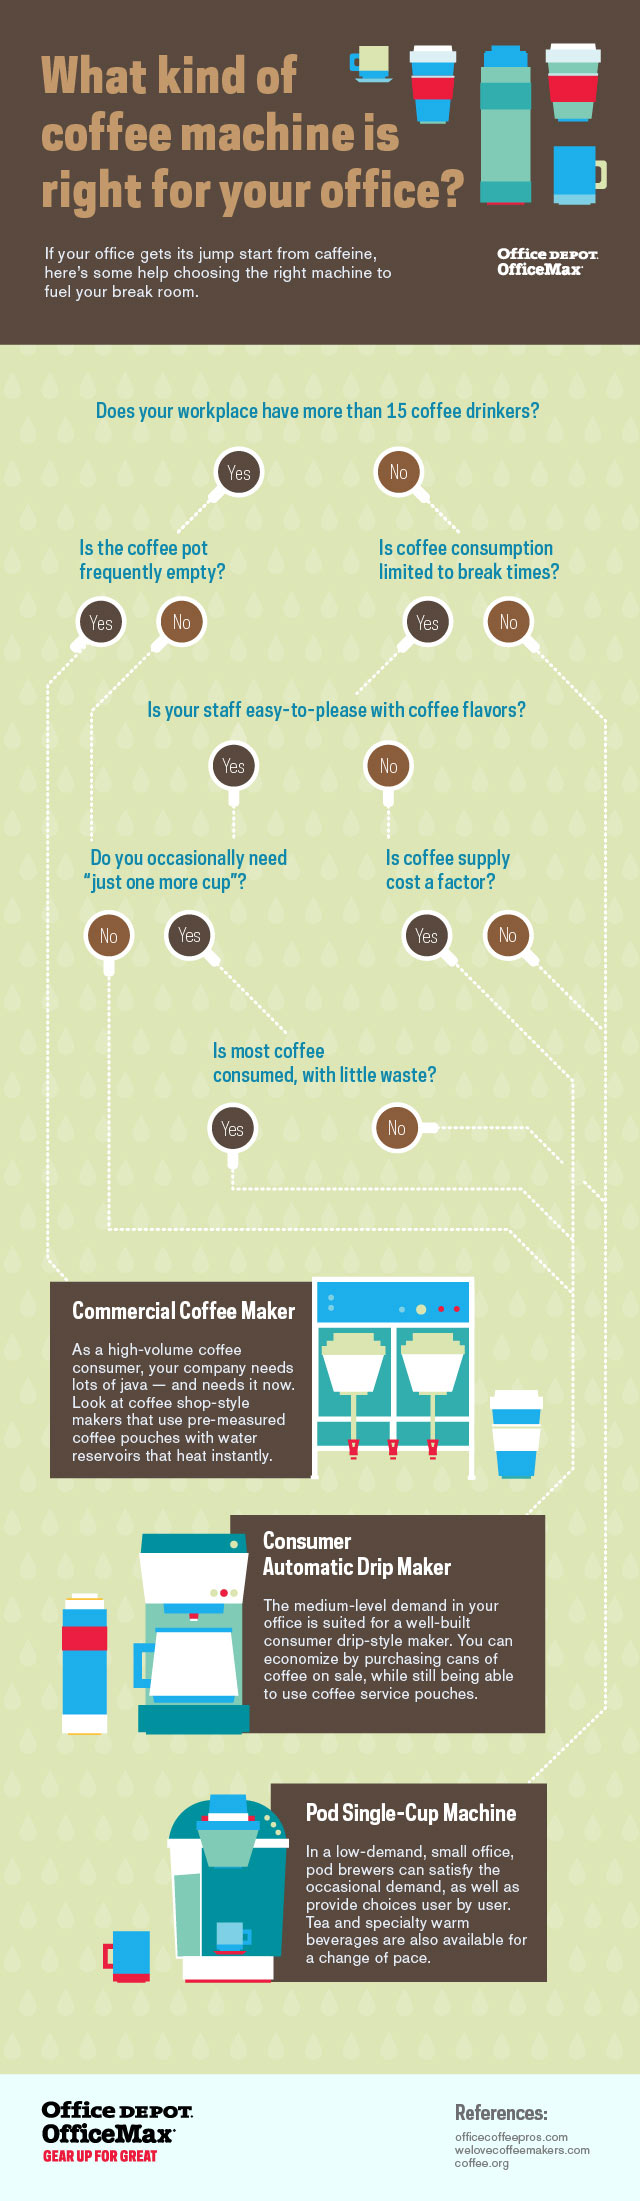 What kind of coffee machine is right for your office